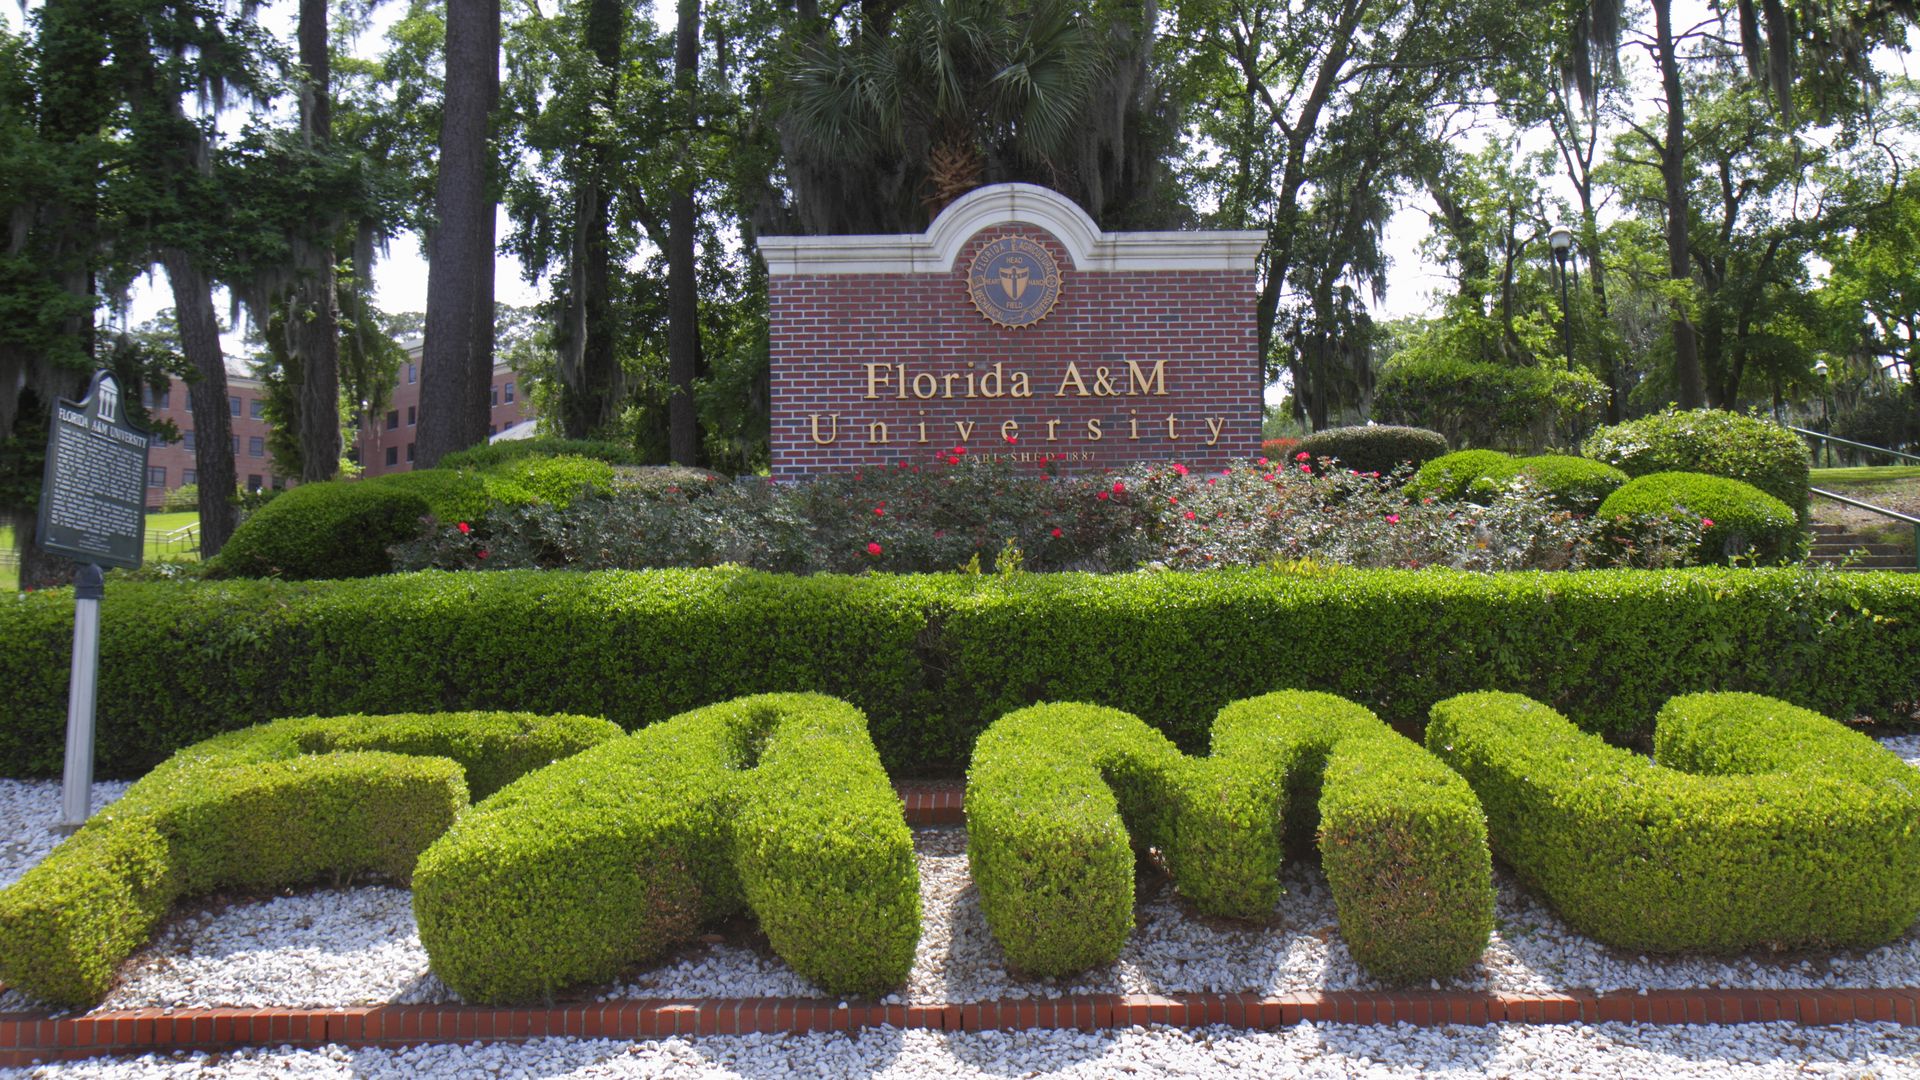 "F A M U" spelled out in bushes